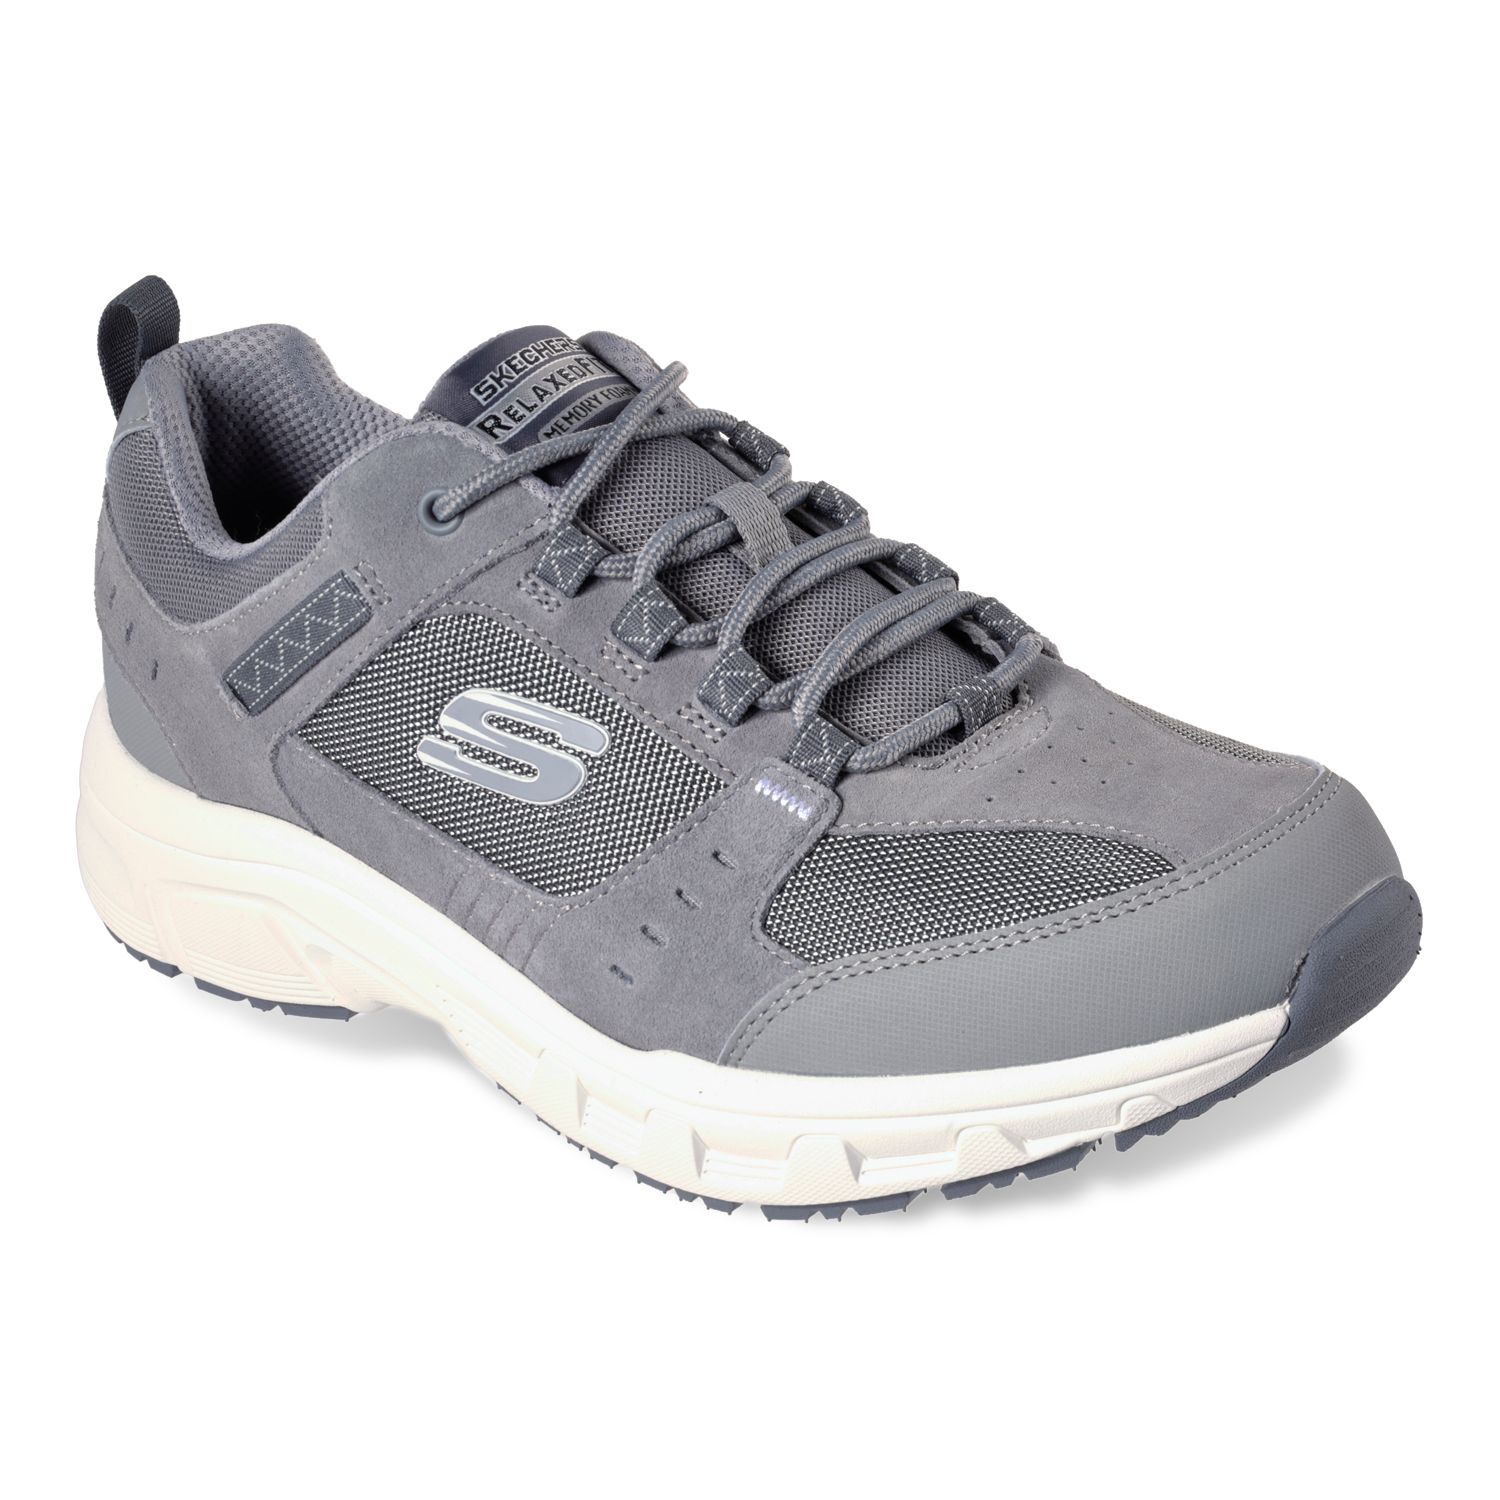 skechers mens sneakers relaxed fit